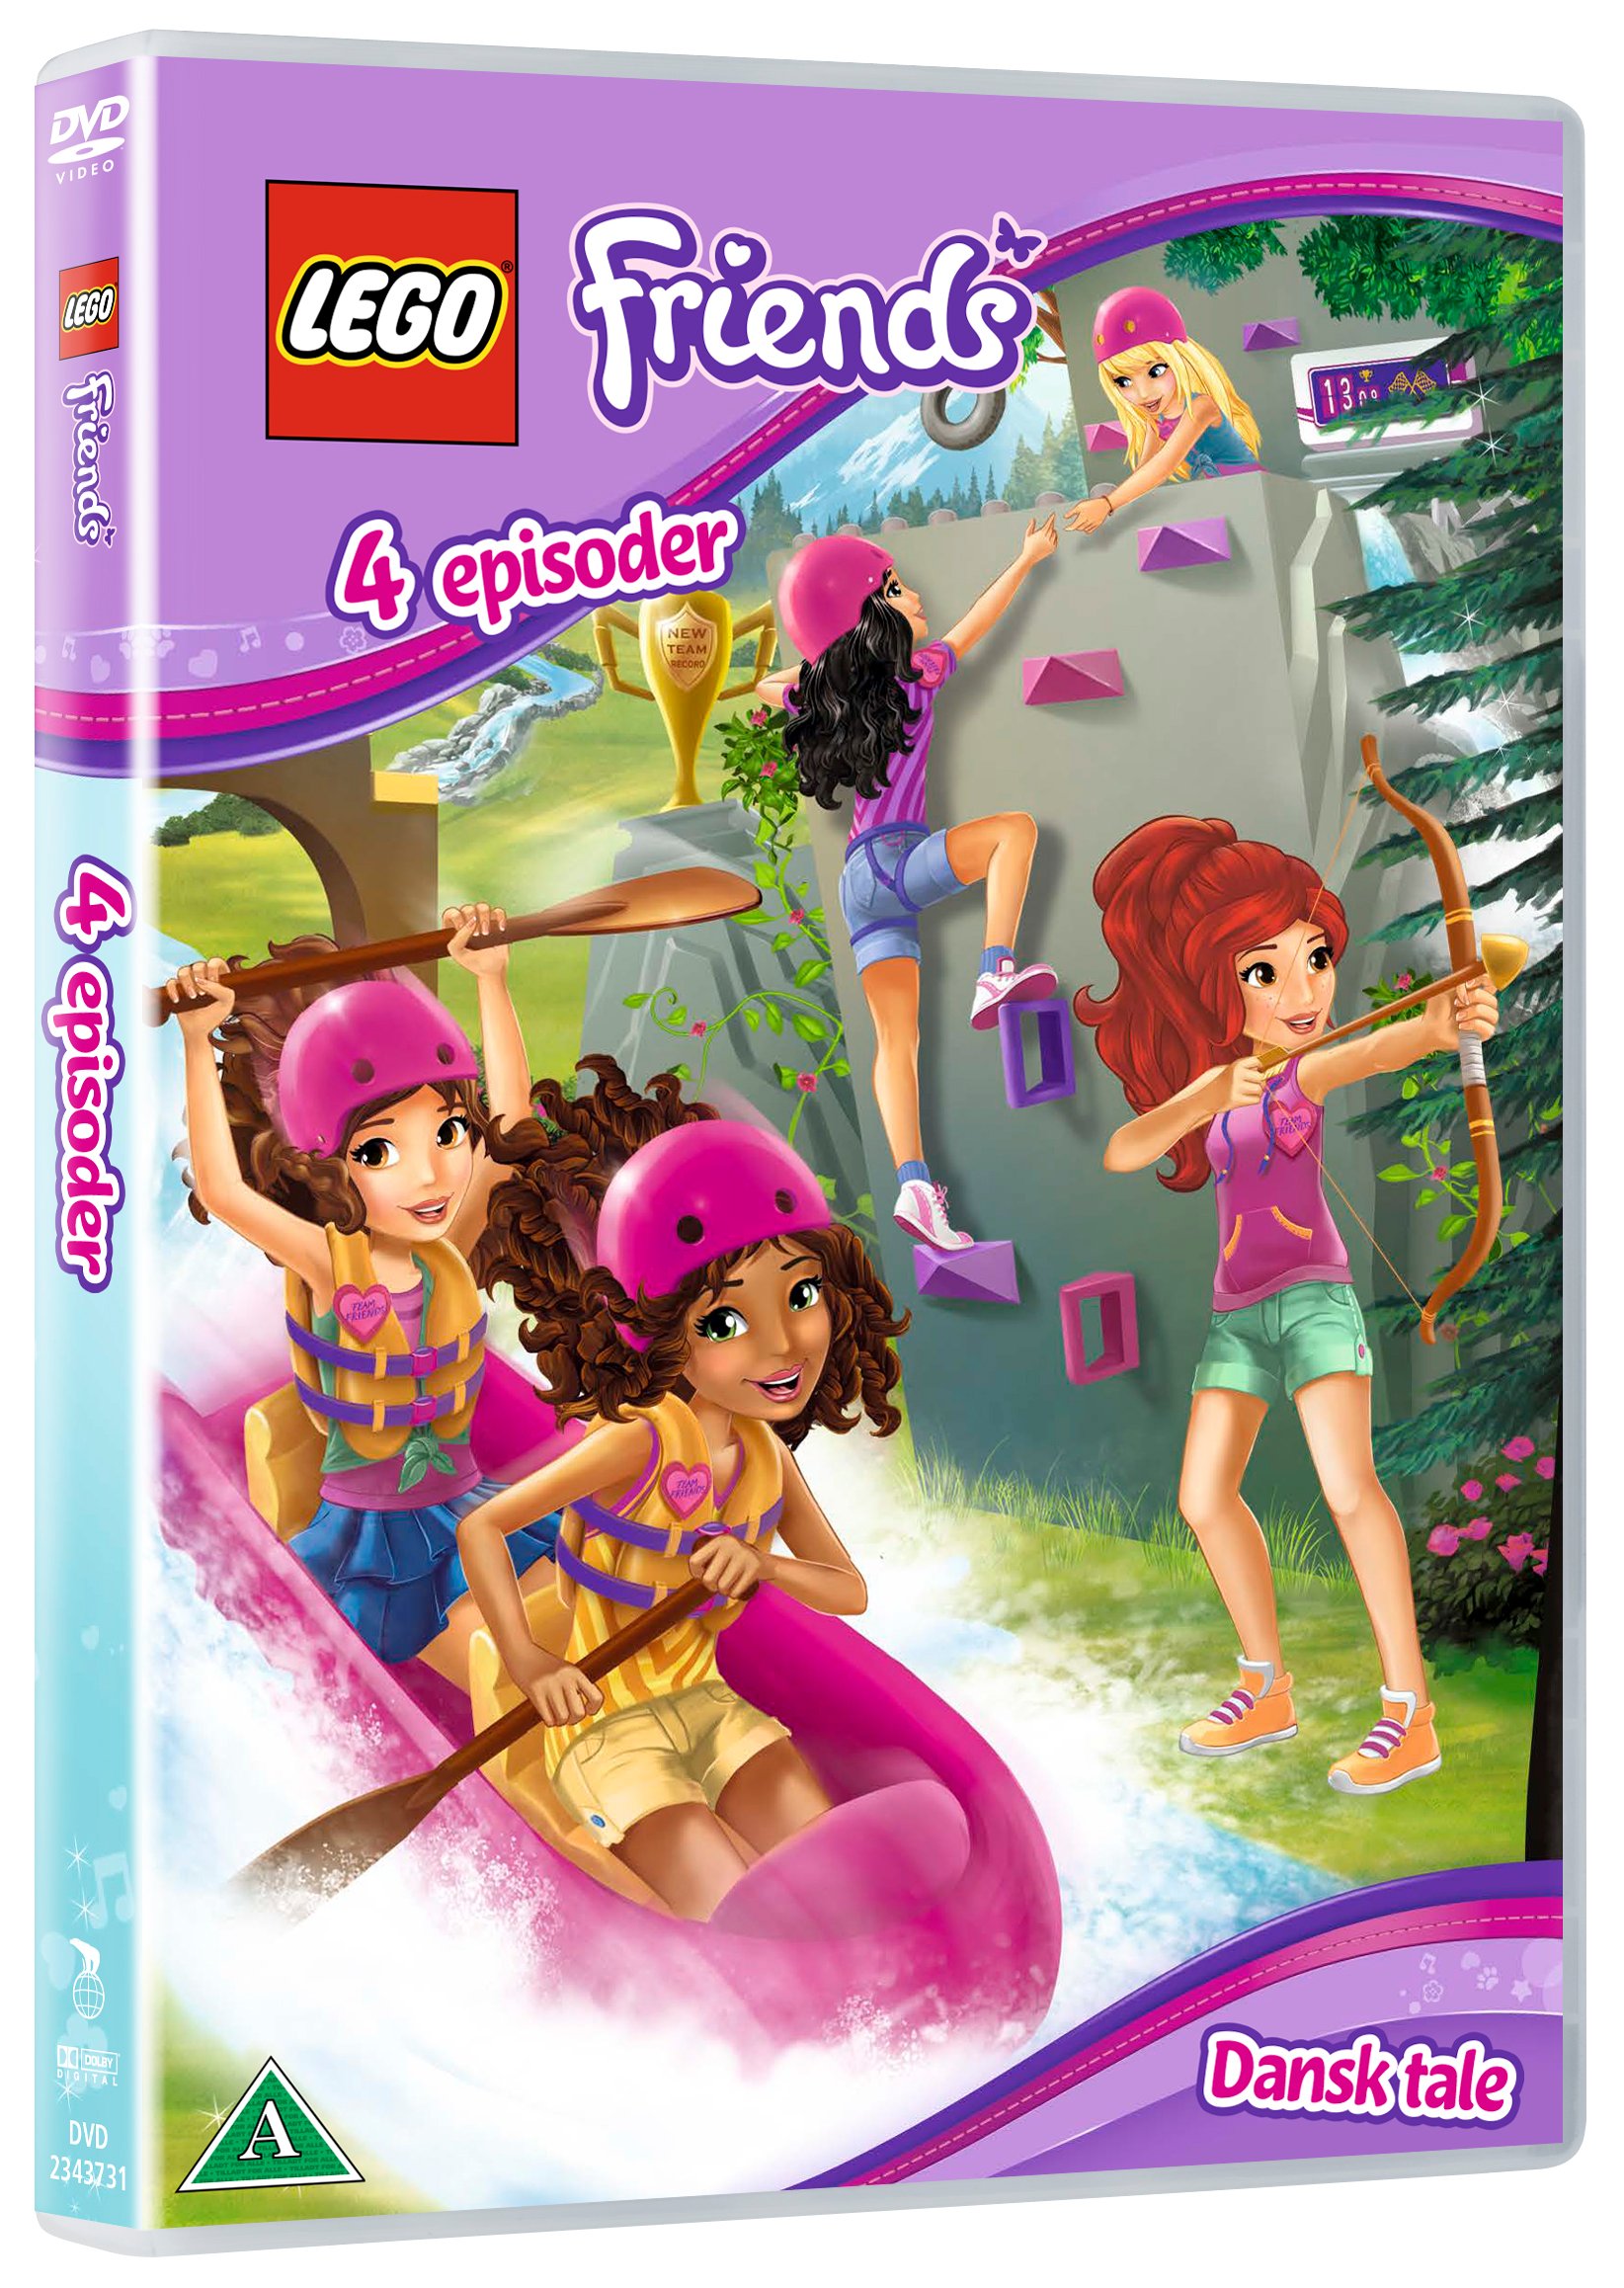 Buy Lego Friends 4 Episoder Dvd Free Shipping